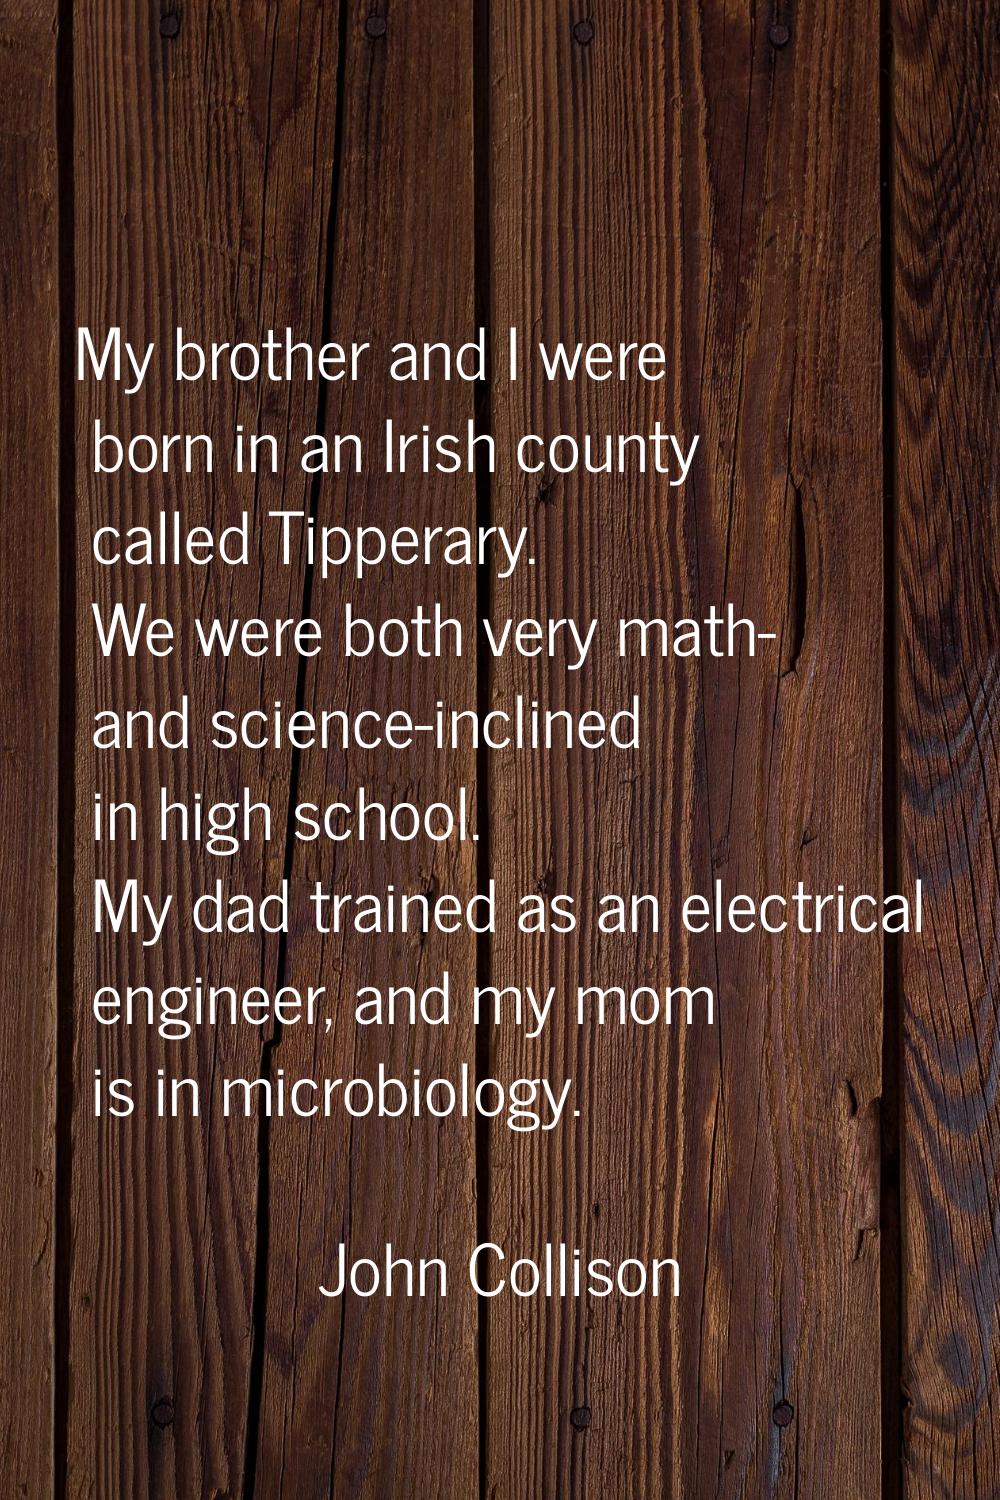 My brother and I were born in an Irish county called Tipperary. We were both very math- and science